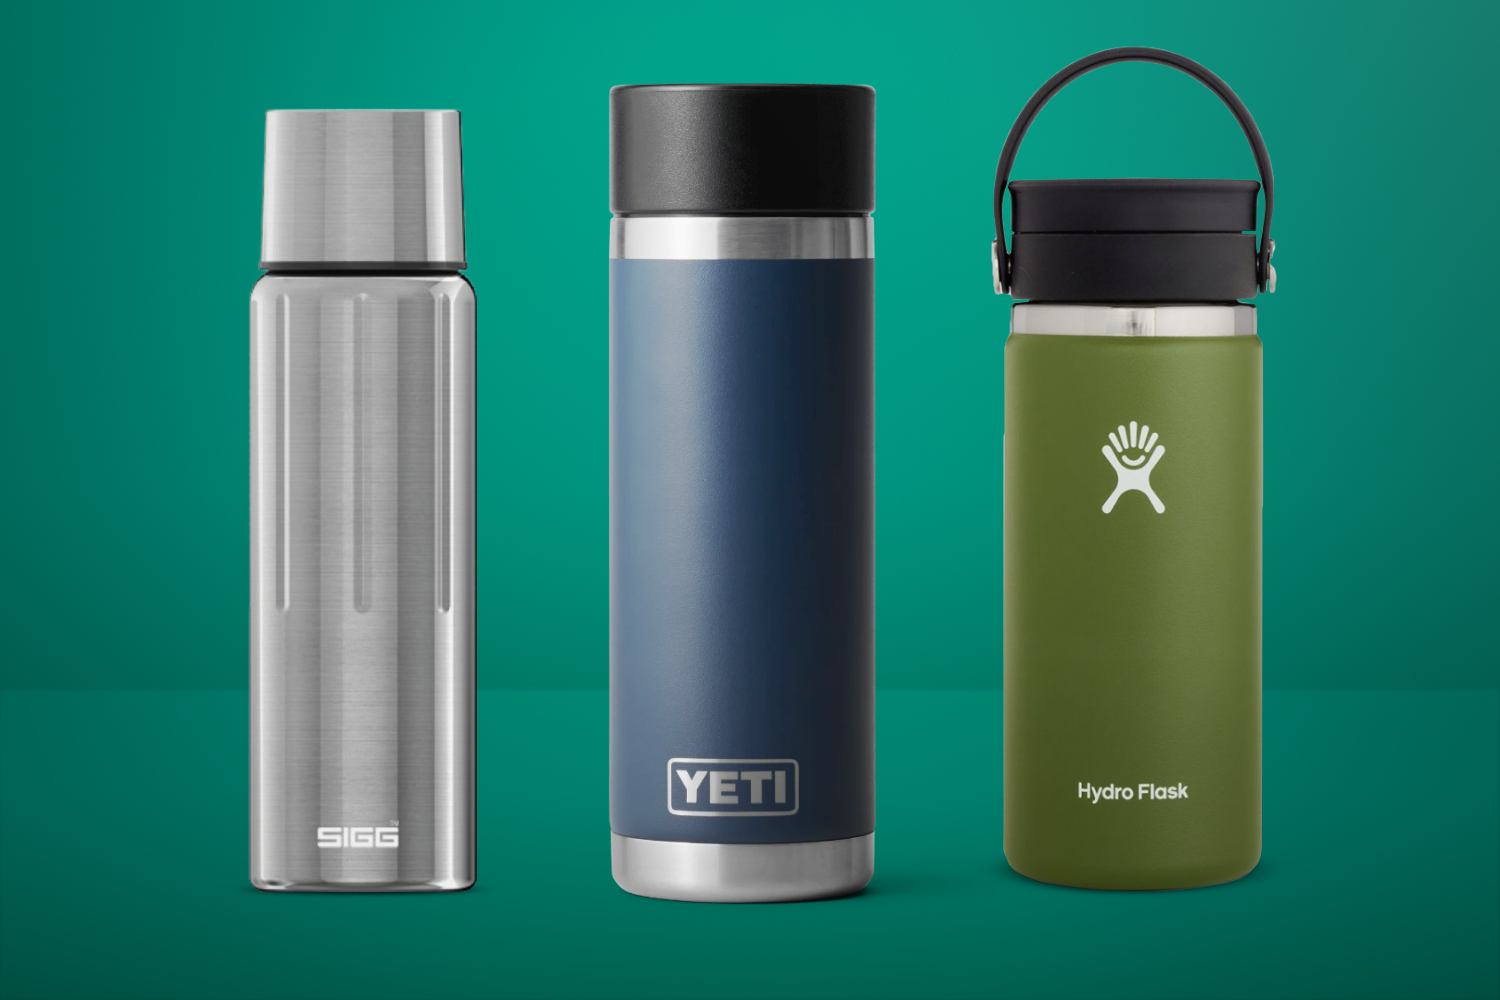 Thermoflask vs Hydro Flask - Which is the Better Bottle?